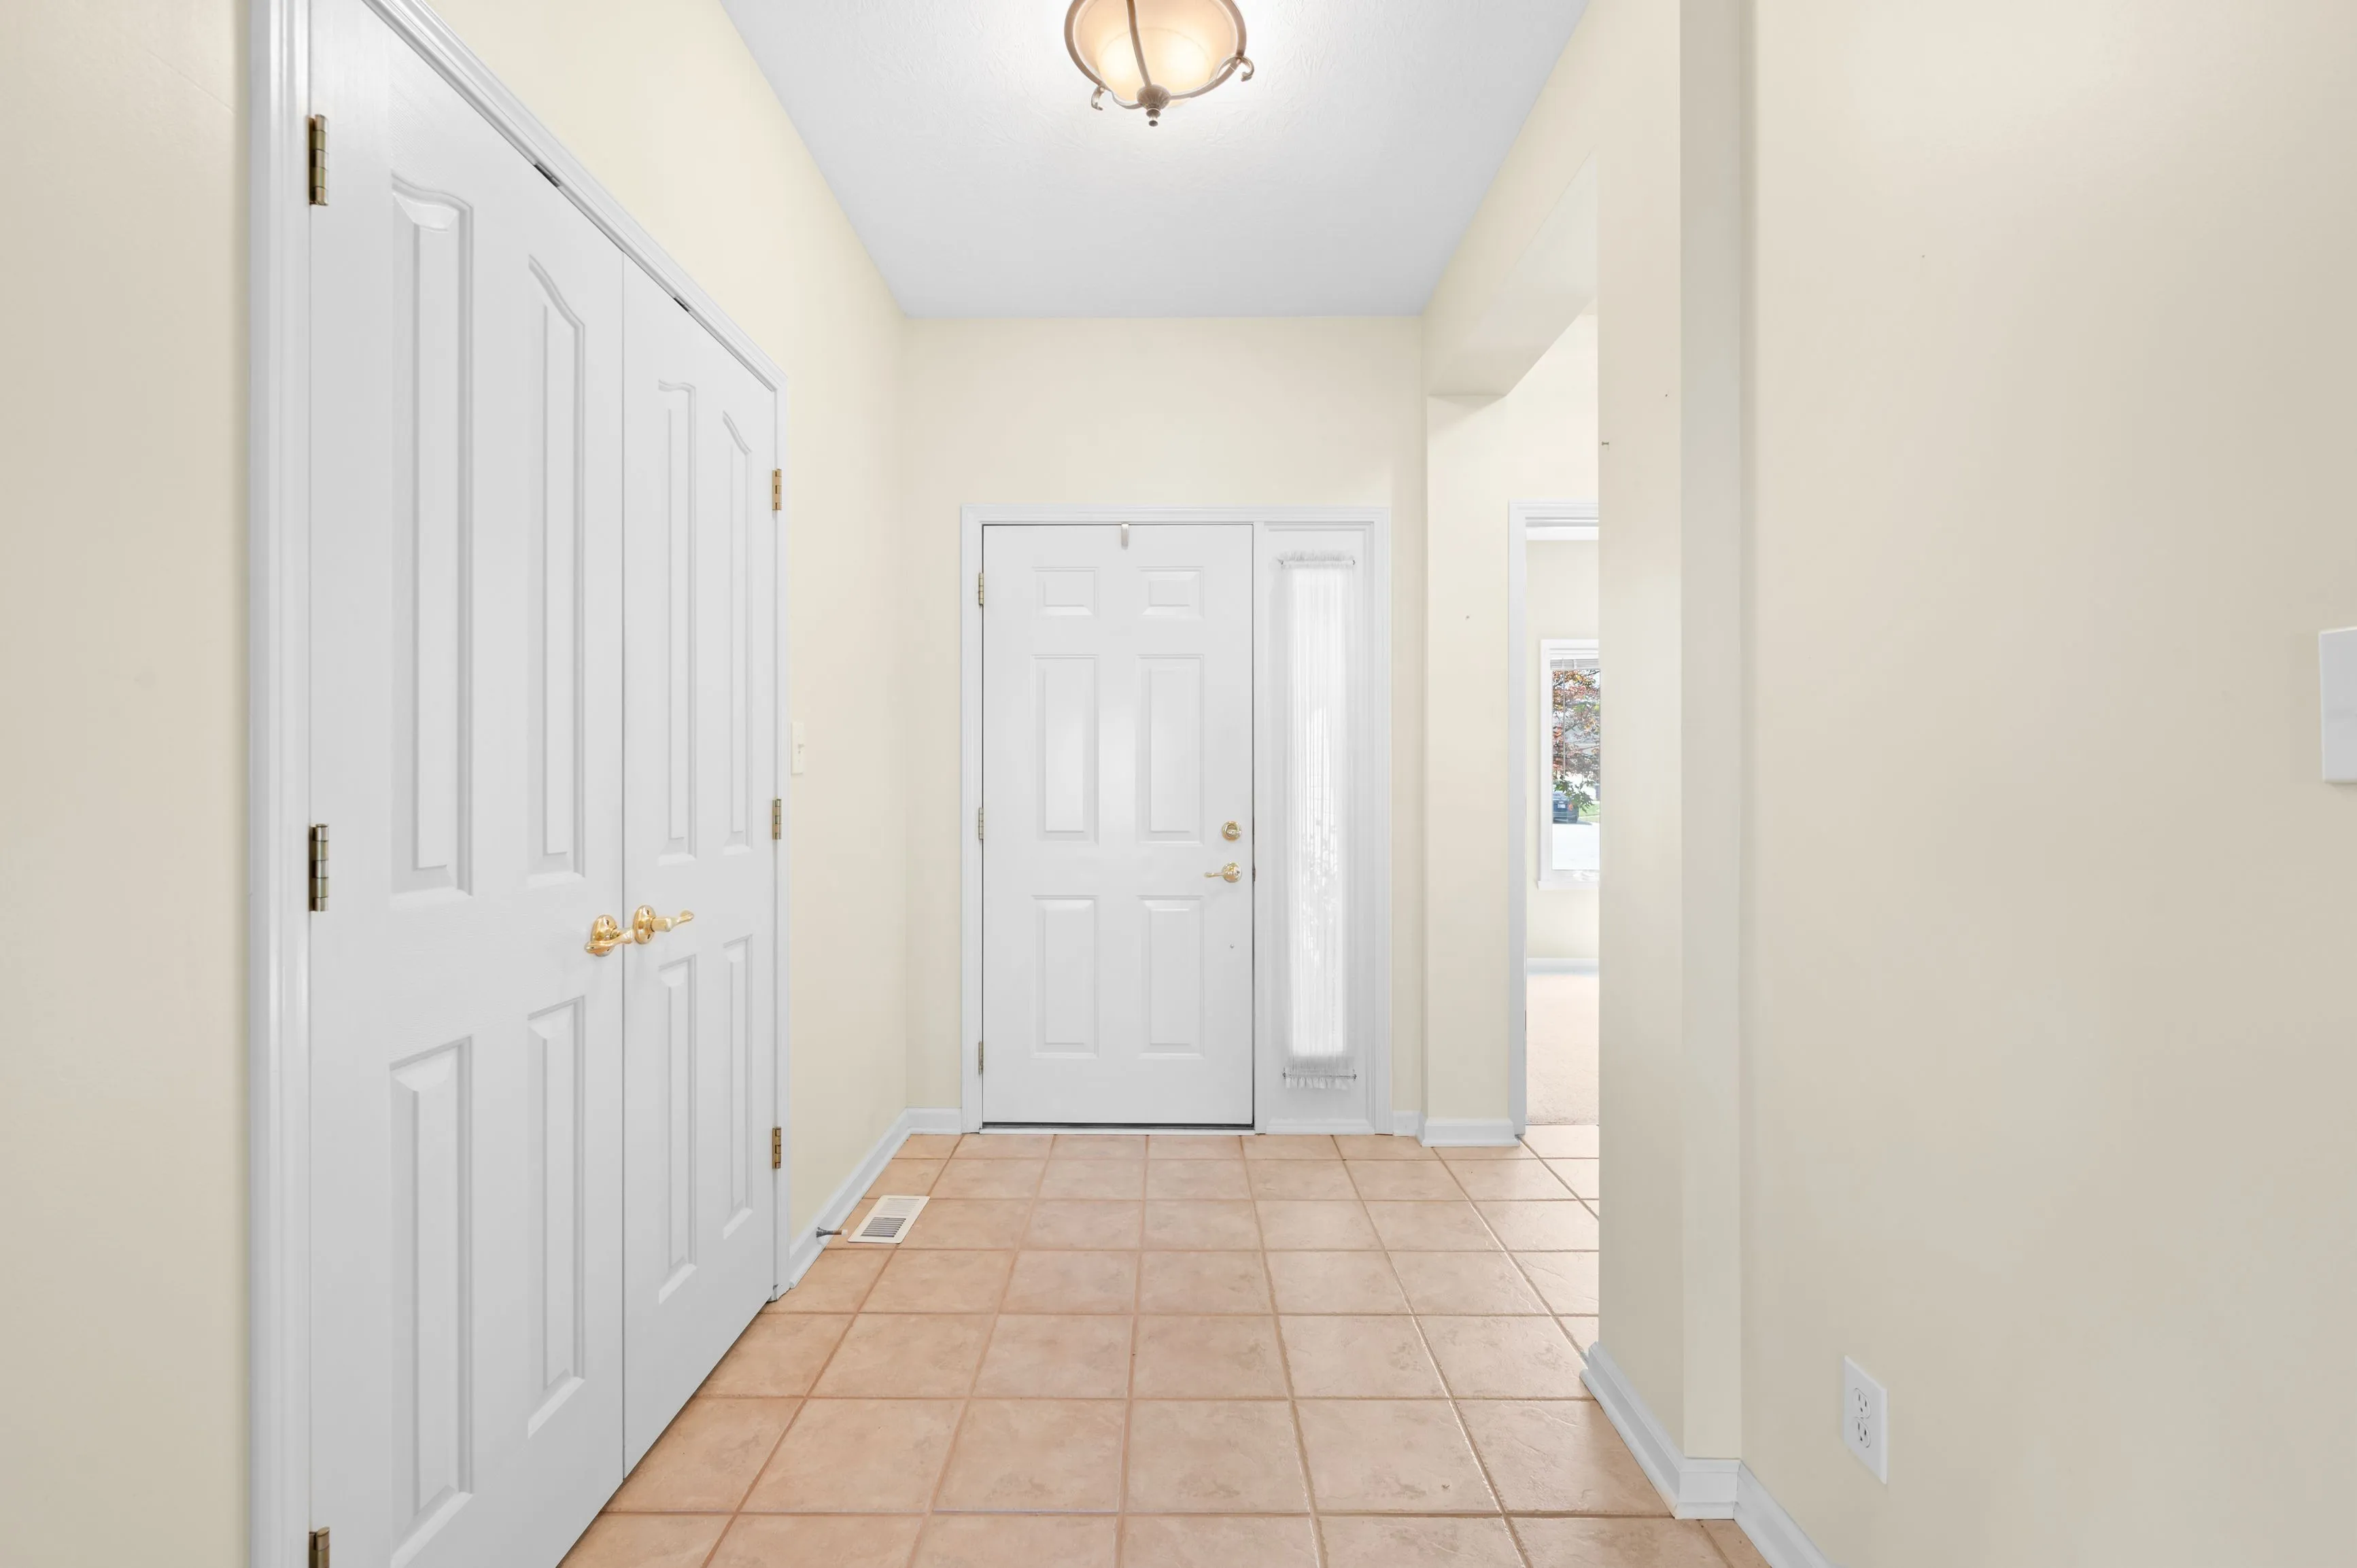 Bright entryway with tiled flooring, white doors, and a ceiling light fixture.